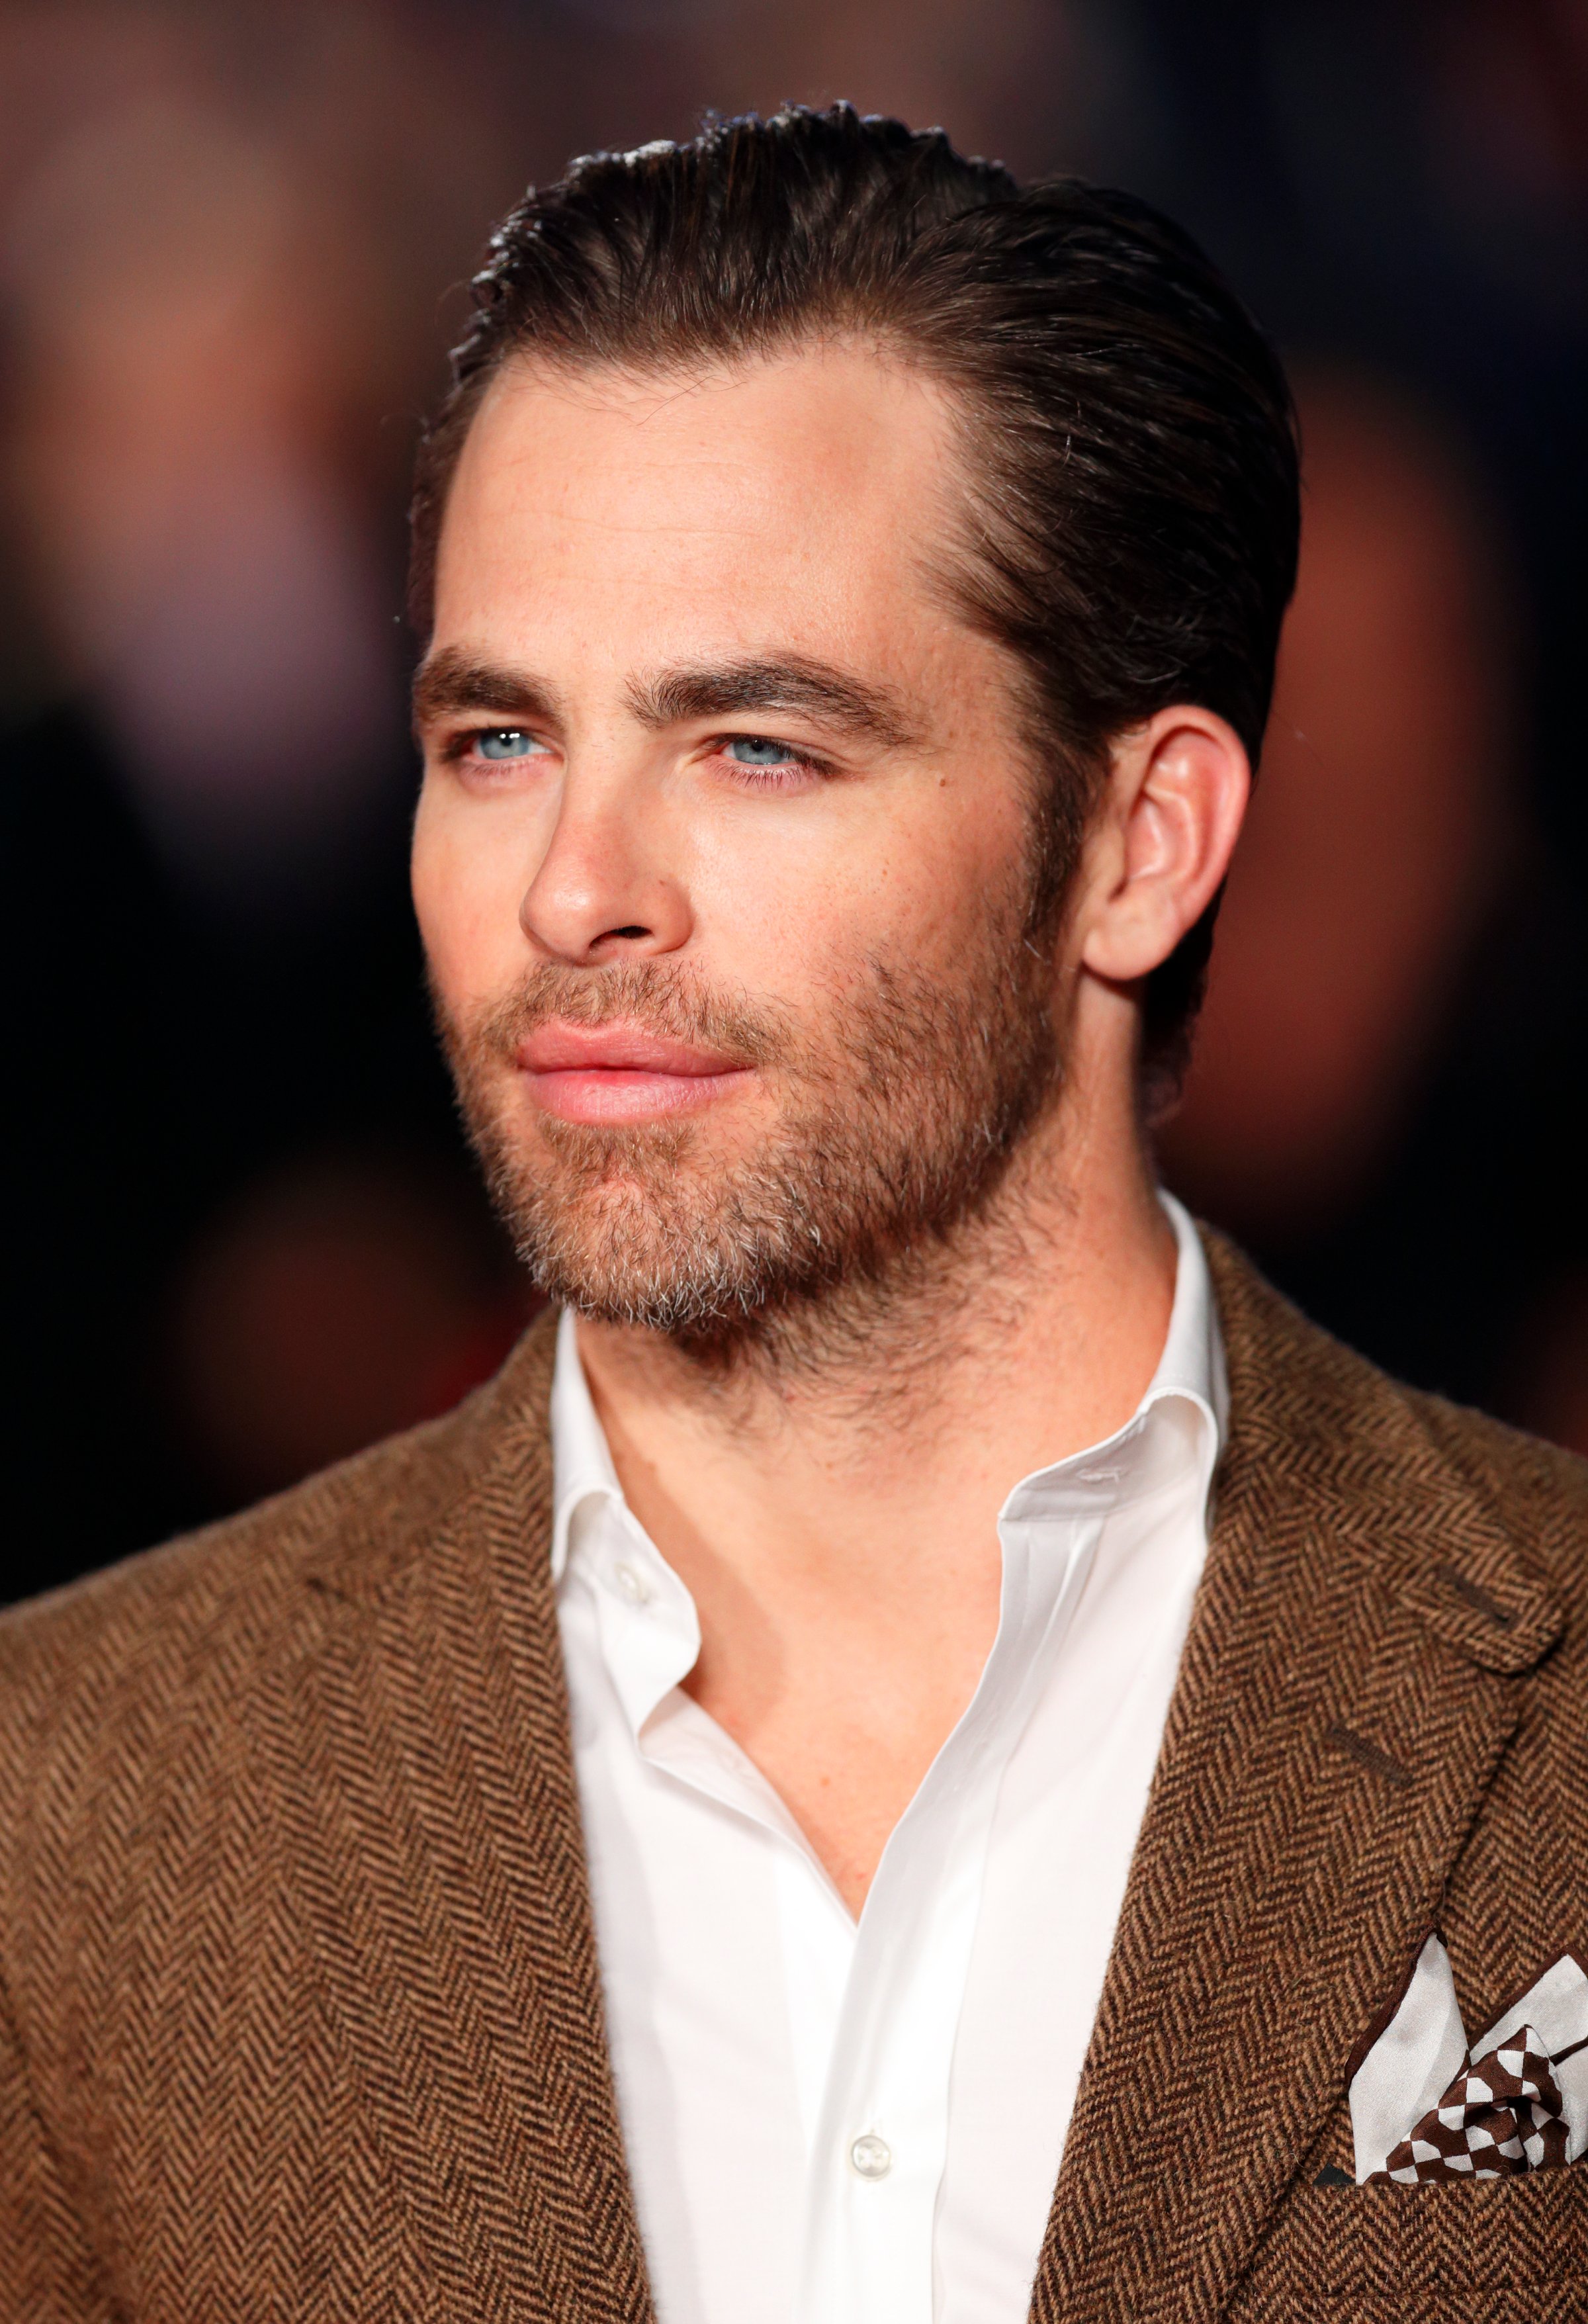 Chris Pine attends the UK Premiere of 'Jack Ryan: Shadow Recruit' at Vue Leicester Square on Jan. 20, 2014 in London.